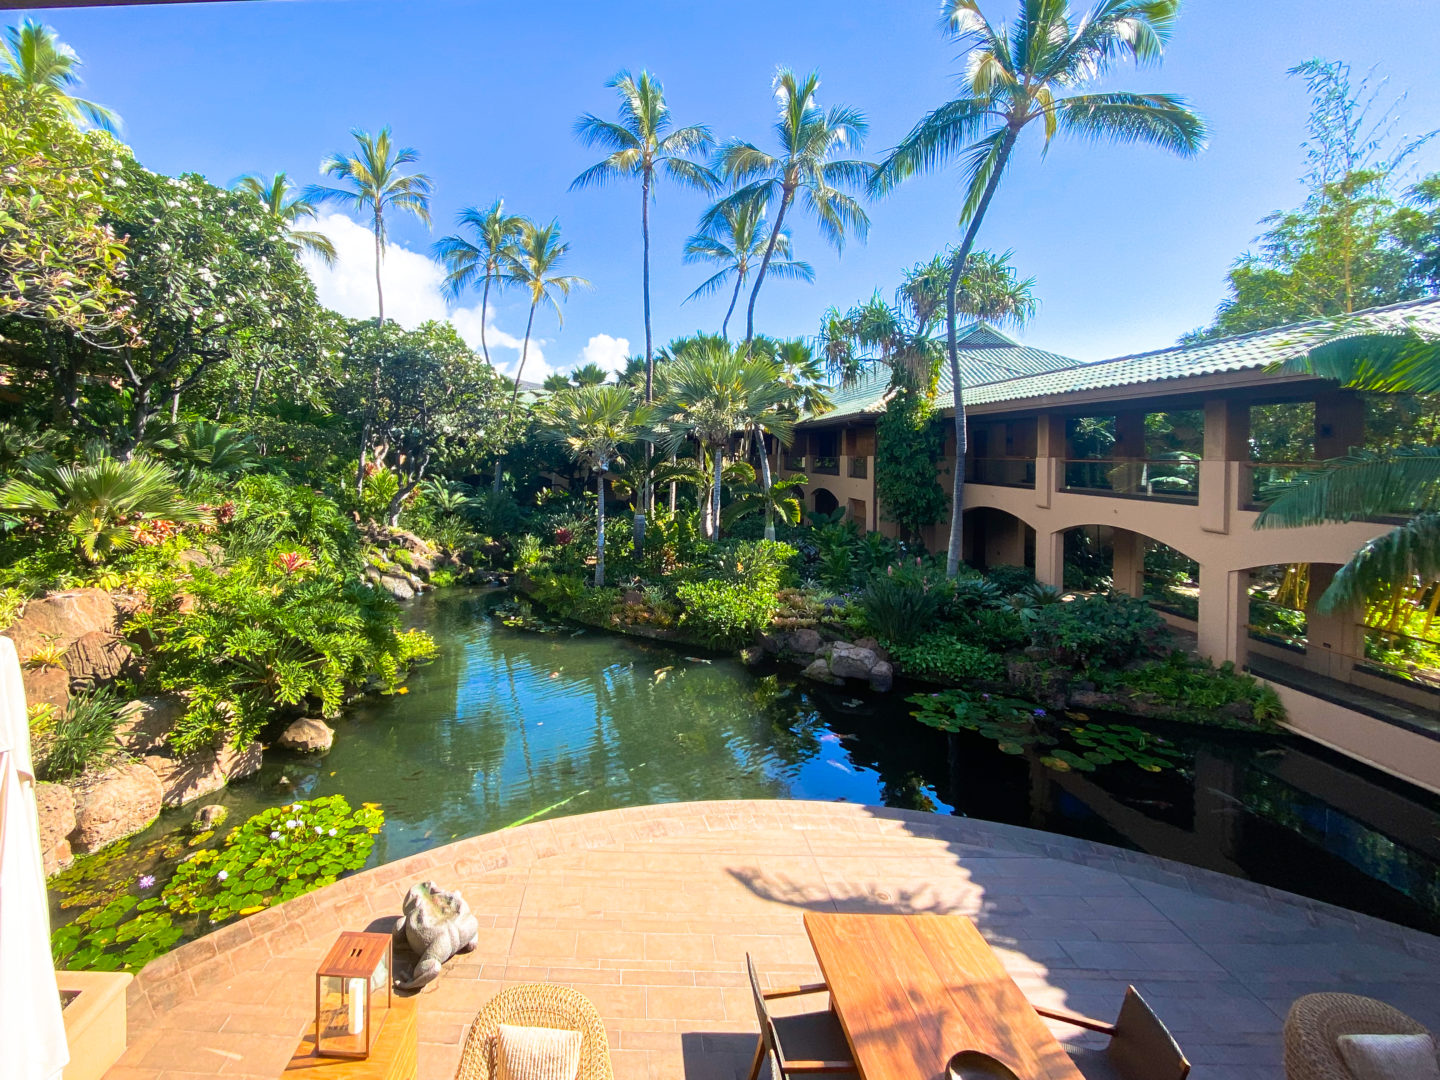 The Lanai Four Seasons grounds include water ways between the hotel rooms and suites.